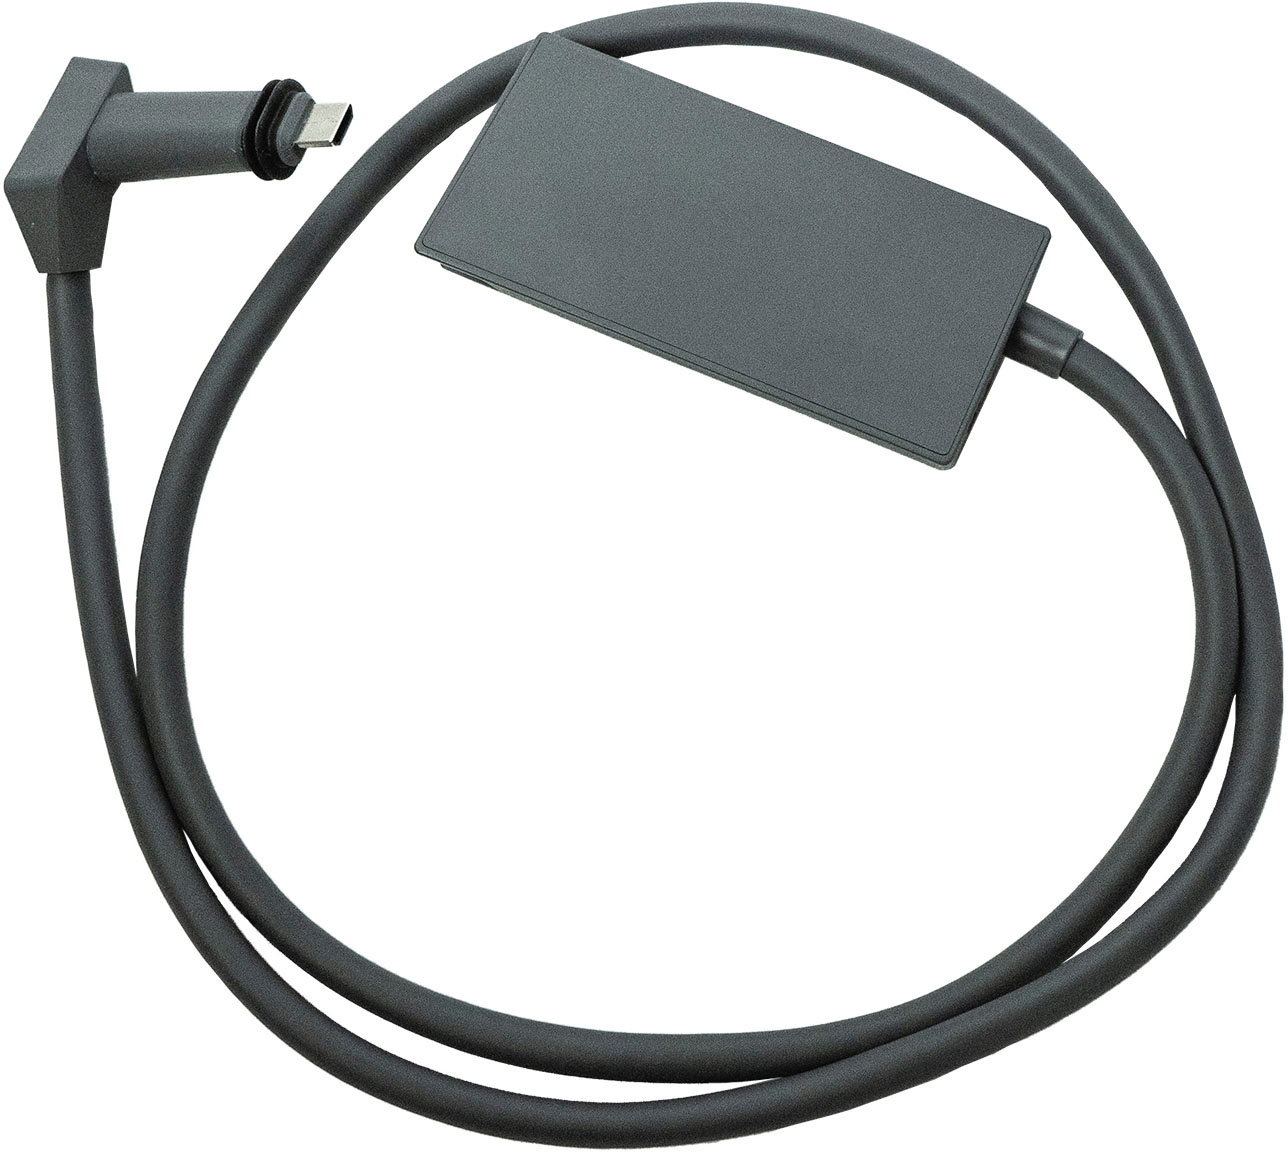 Starlink Ethernet Adapter for Wired External Network, black (01560575-001)